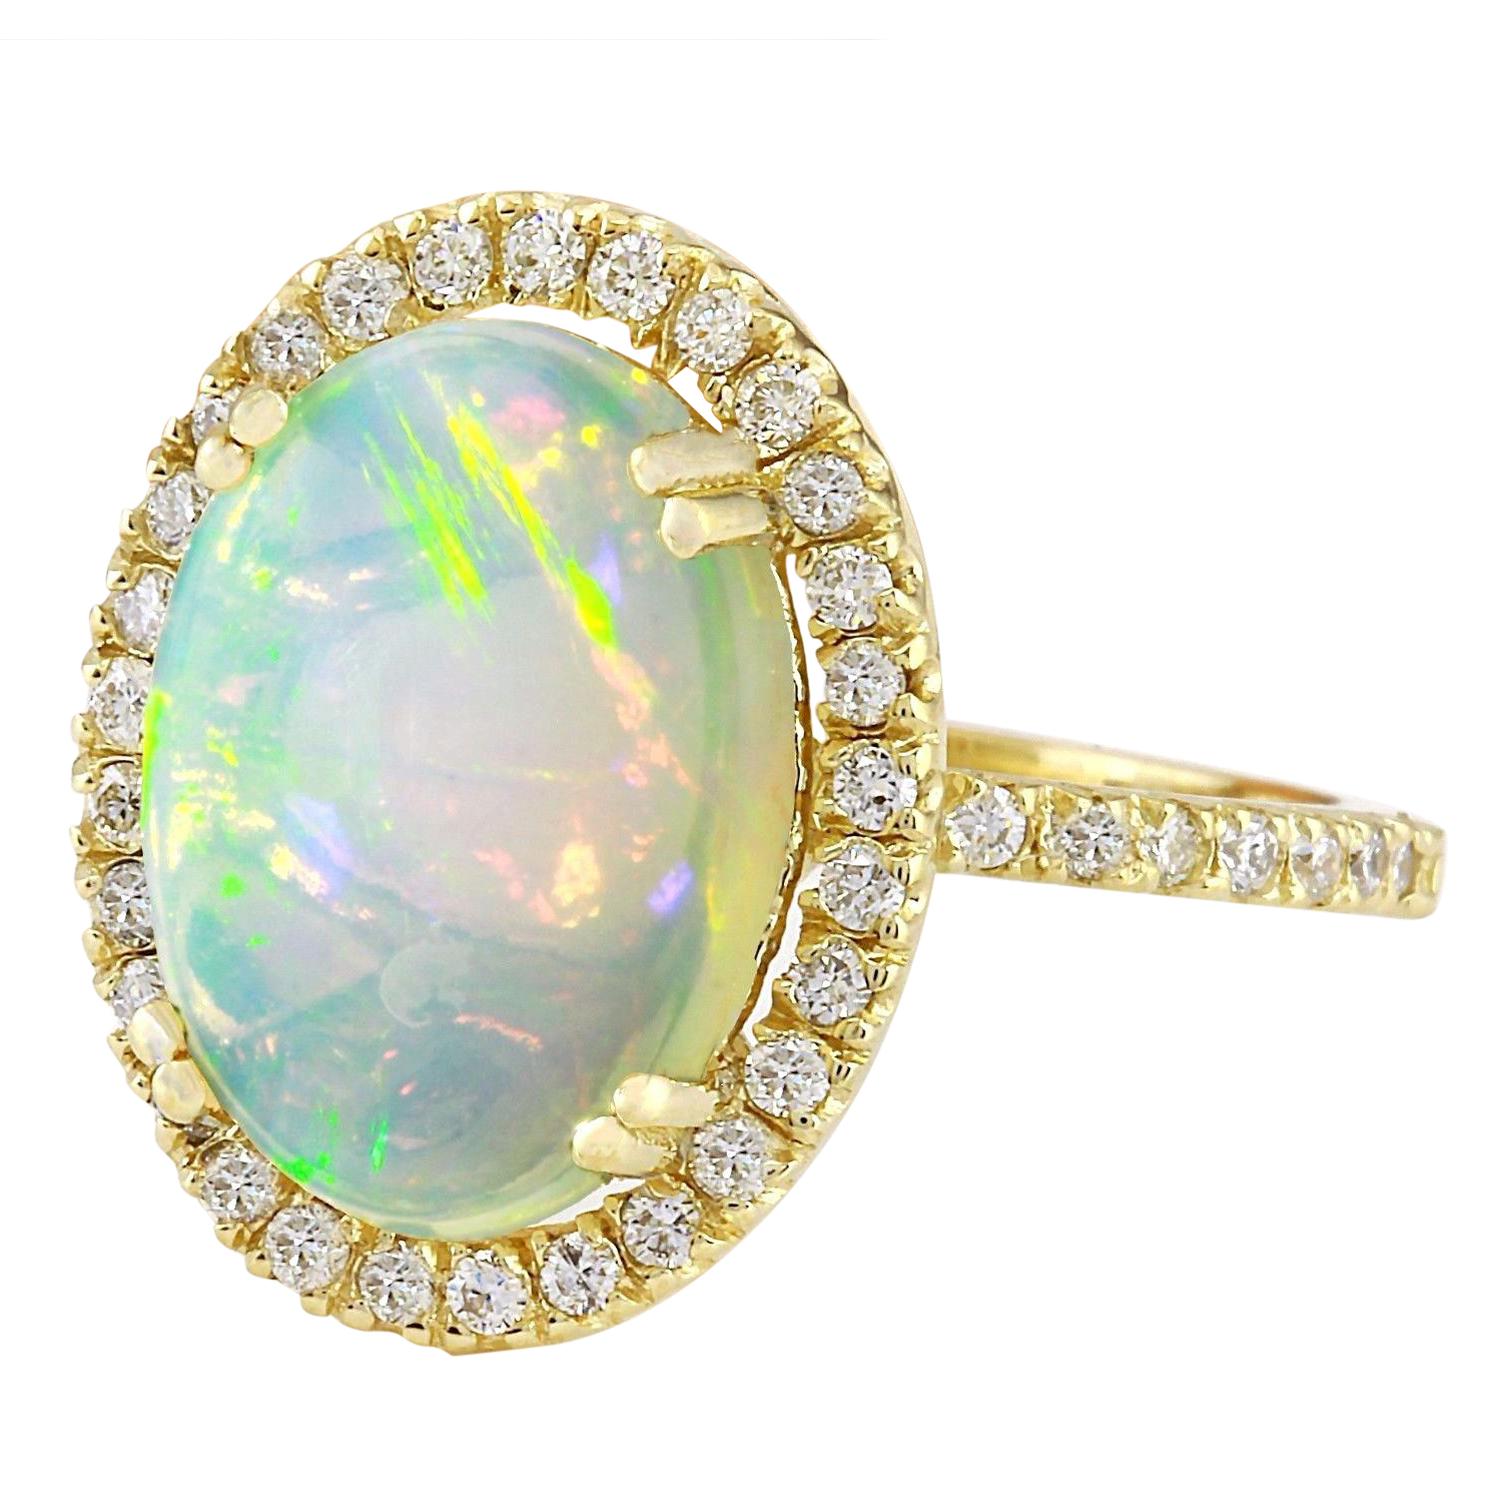 Introducing our captivating 14K Solid Yellow Gold Diamond Ring, featuring a mesmerizing 3.60 Carat Natural Opal centerpiece. Crafted with exquisite detail and elegance, this ring exudes sophistication and charm. The opal, weighing 3.10 Carats and